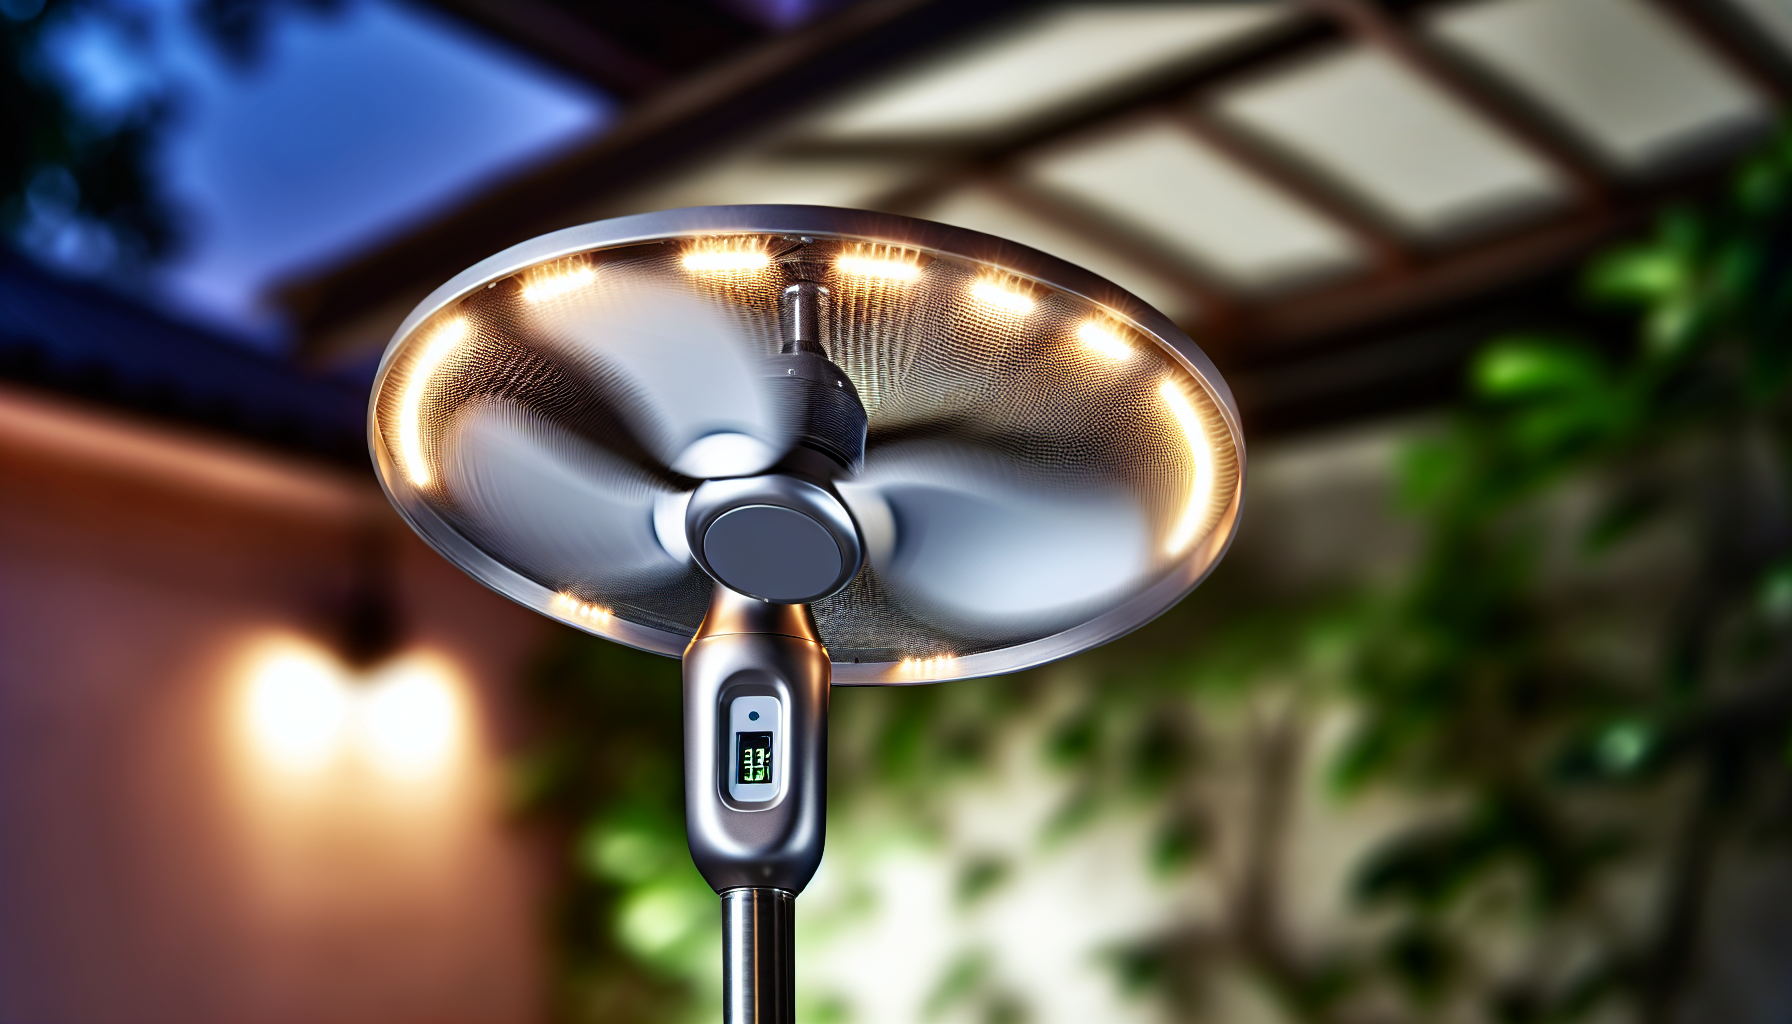 Energy-efficient outdoor fan with LED lighting